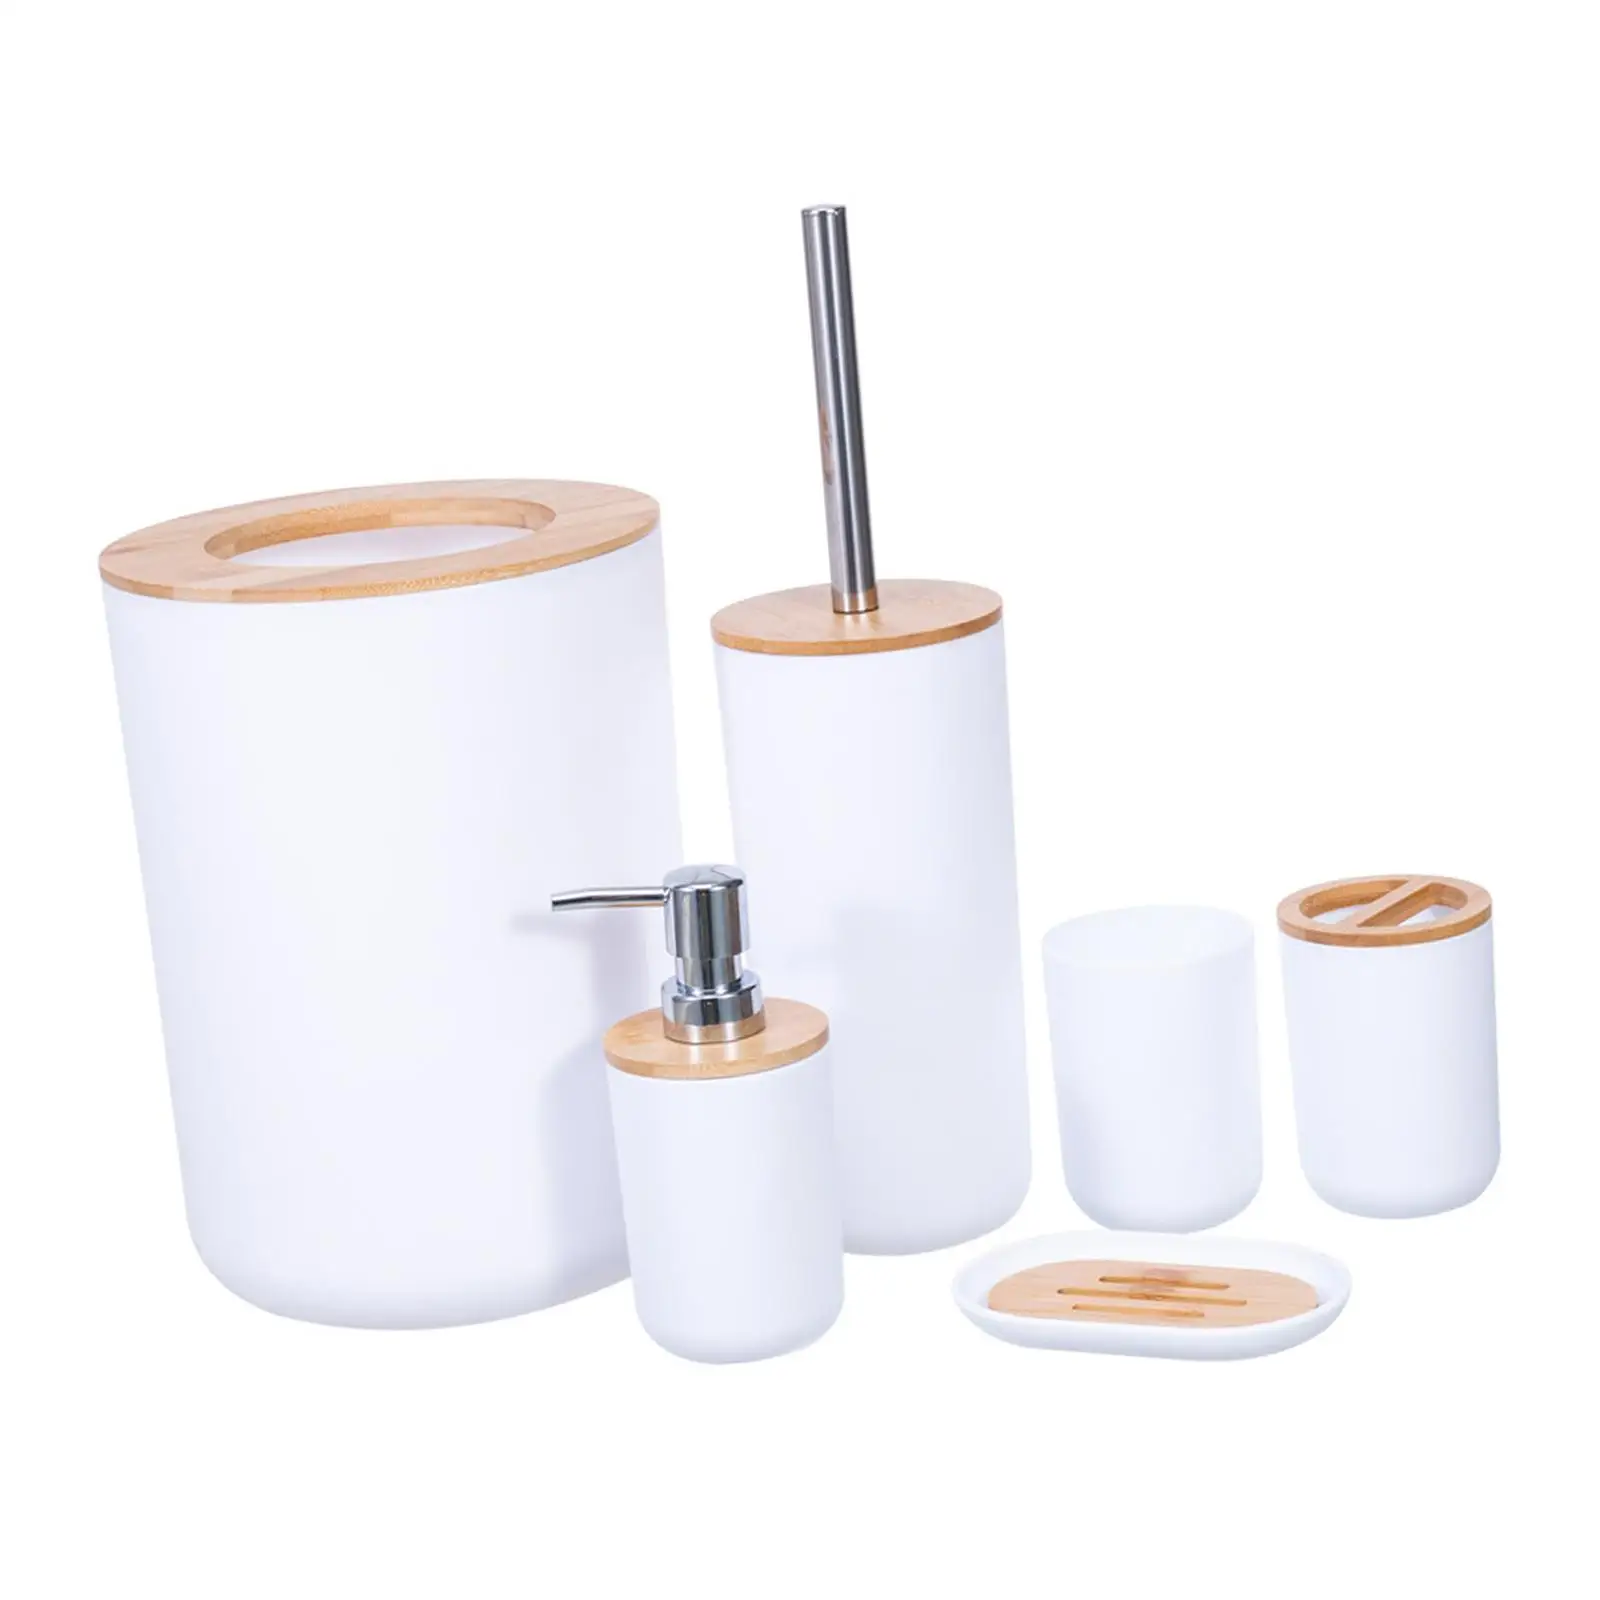 6Pcs Bathroom Accessories Set Toilet Brush Toothbrush Cup Trash Can Modern Bathroom Decor for Bathroom Apartment Home Dorm Gifts